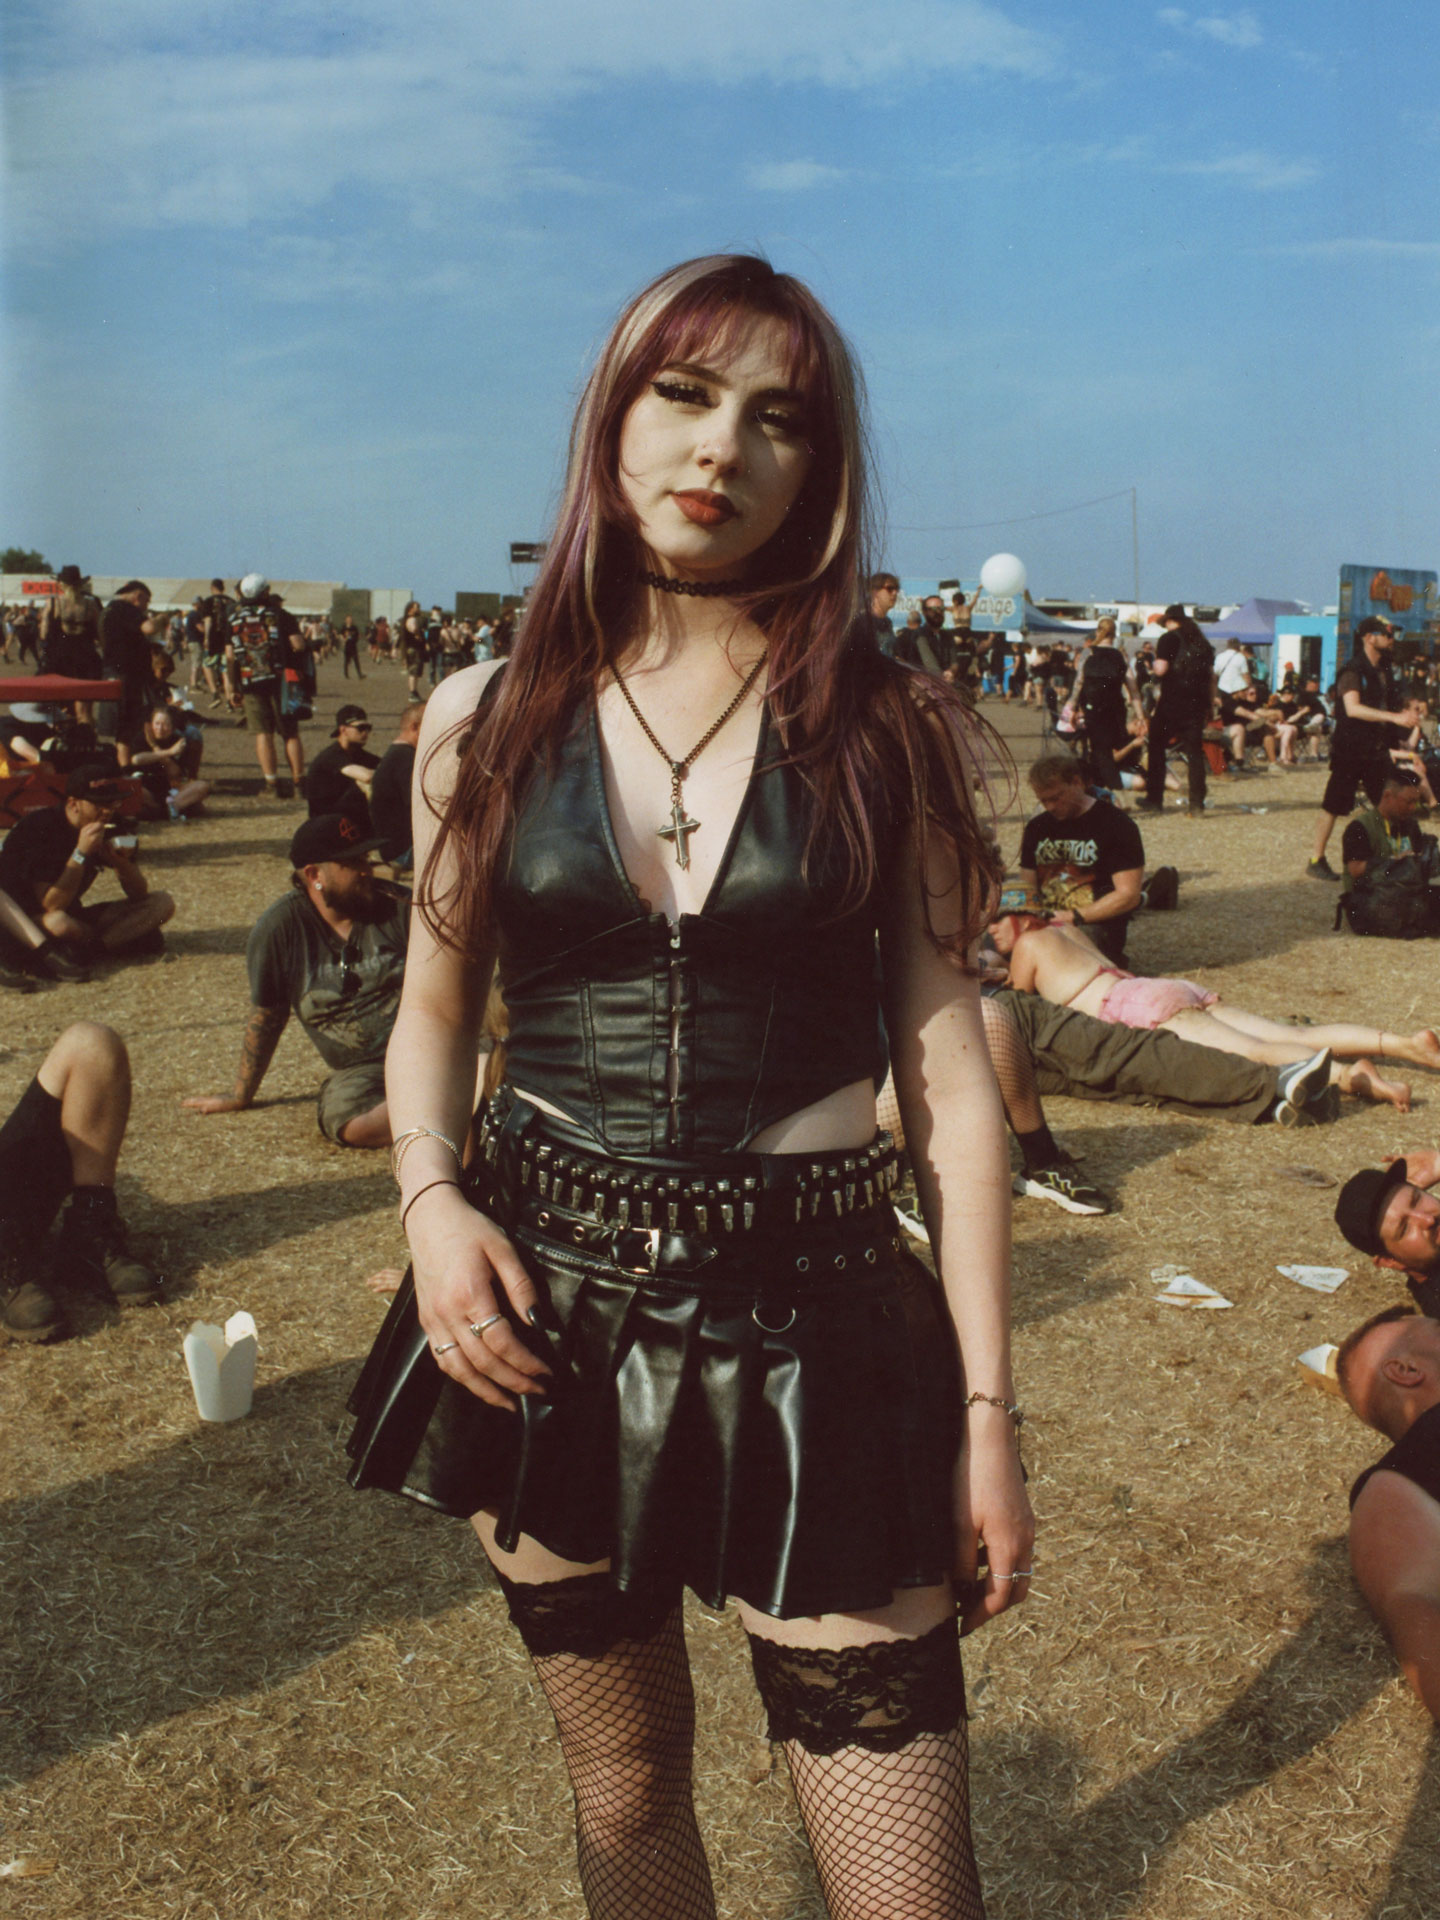 a goth girl in a leather corset and skirt wears fish net suspenders and a crucifix necklace. her hair is purple and silver 